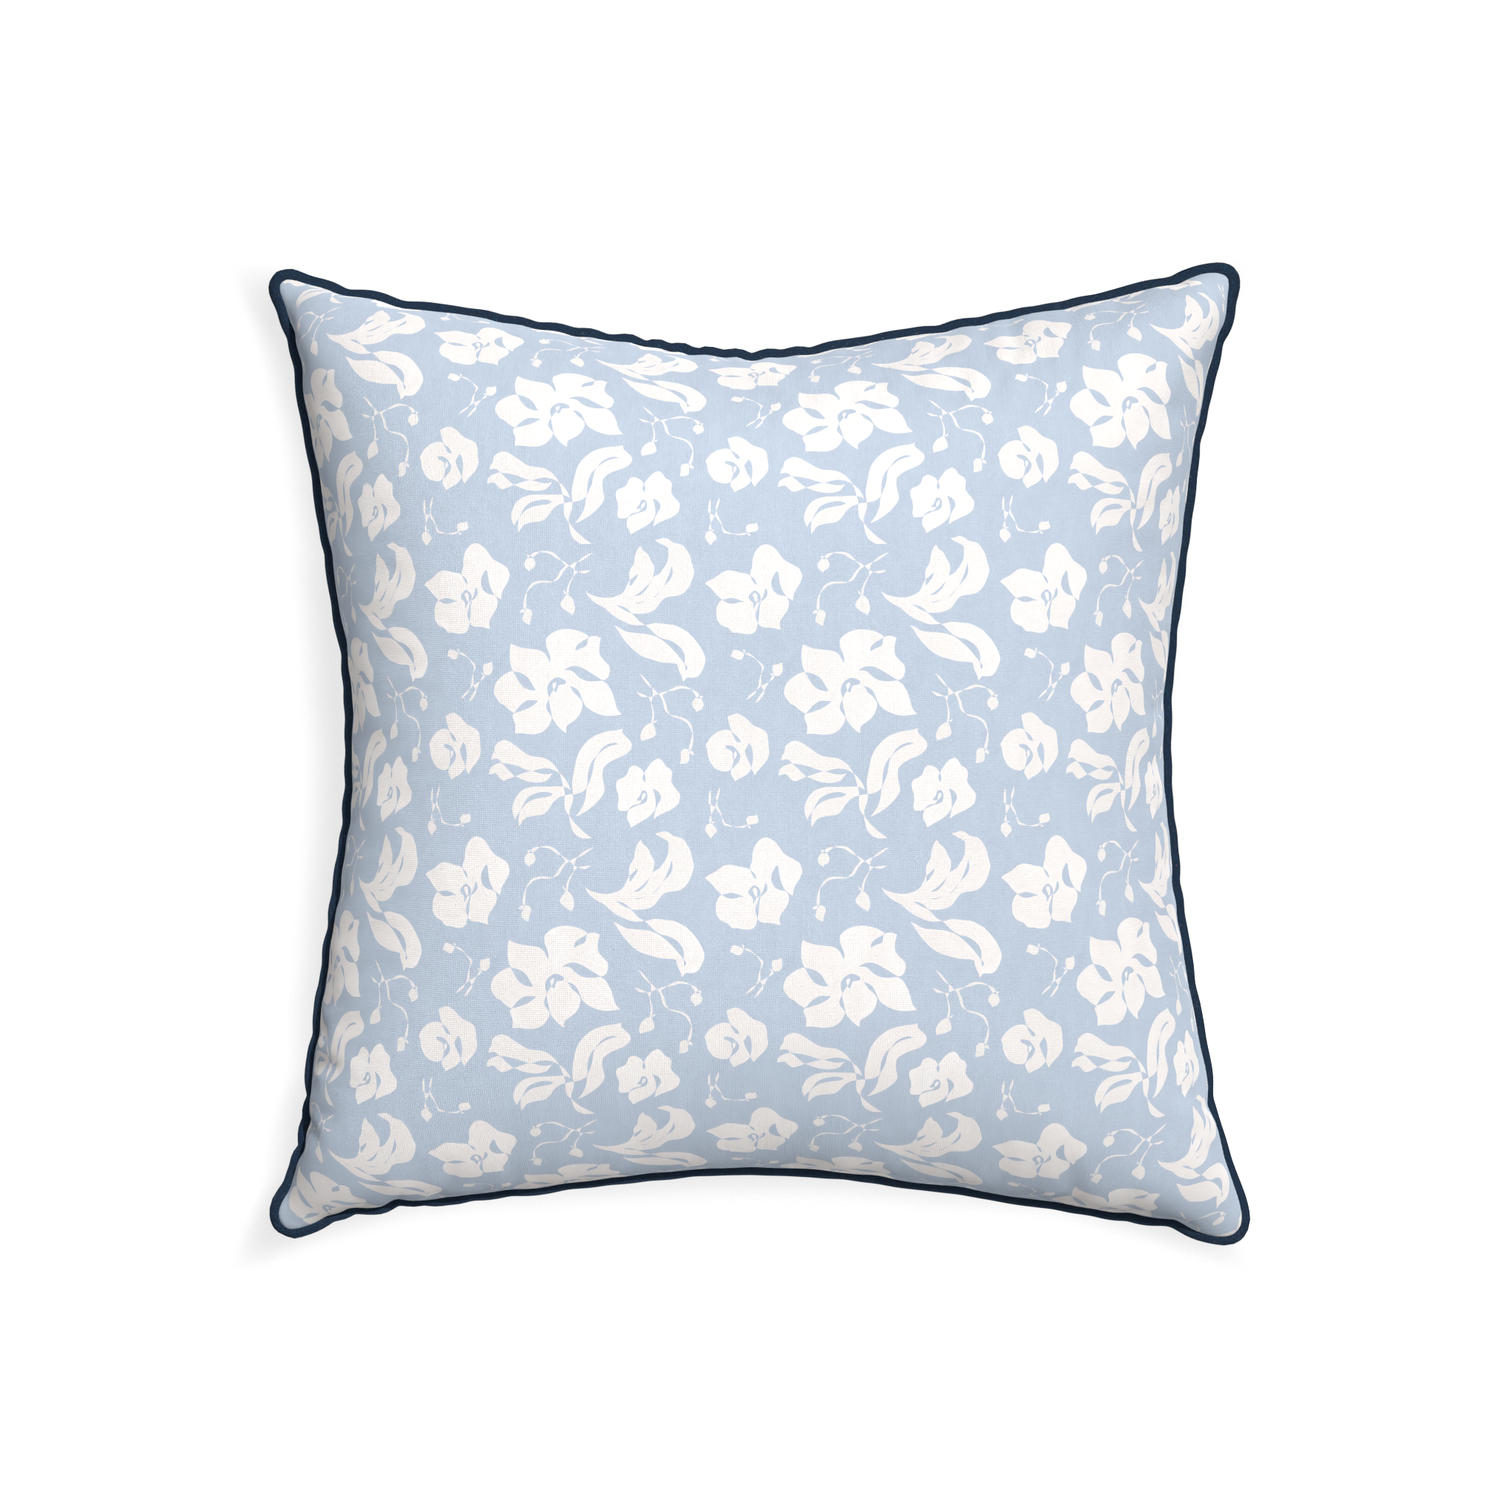 22-square georgia custom cornflower blue floralpillow with c piping on white background